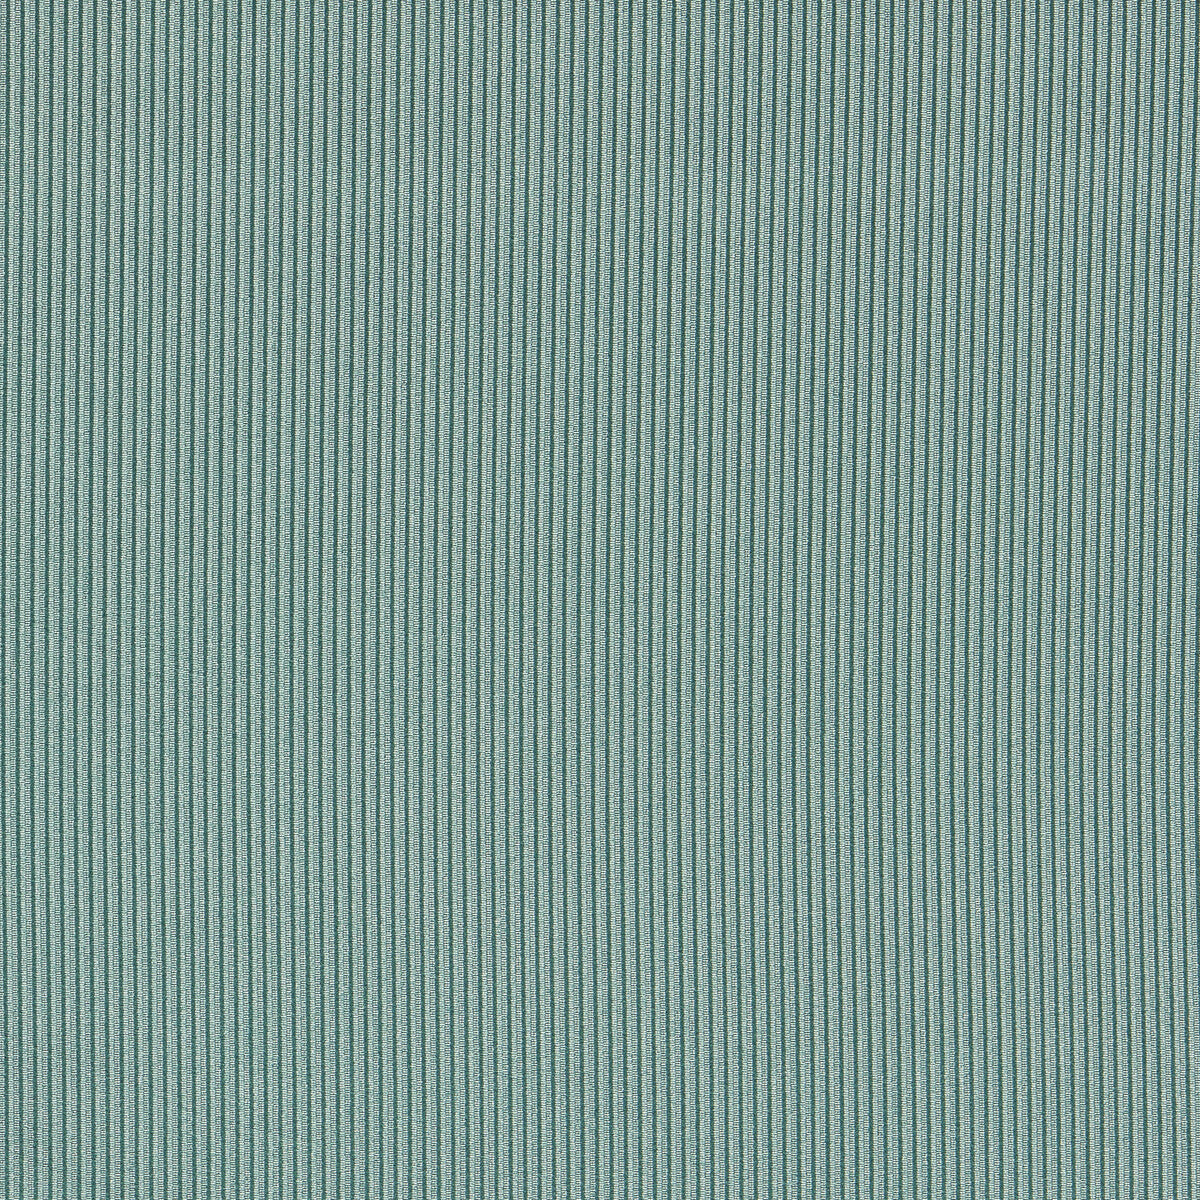 Ashdown fabric in teal color - pattern F1688/07.CAC.0 - by Clarke And Clarke in the Whitworth collection